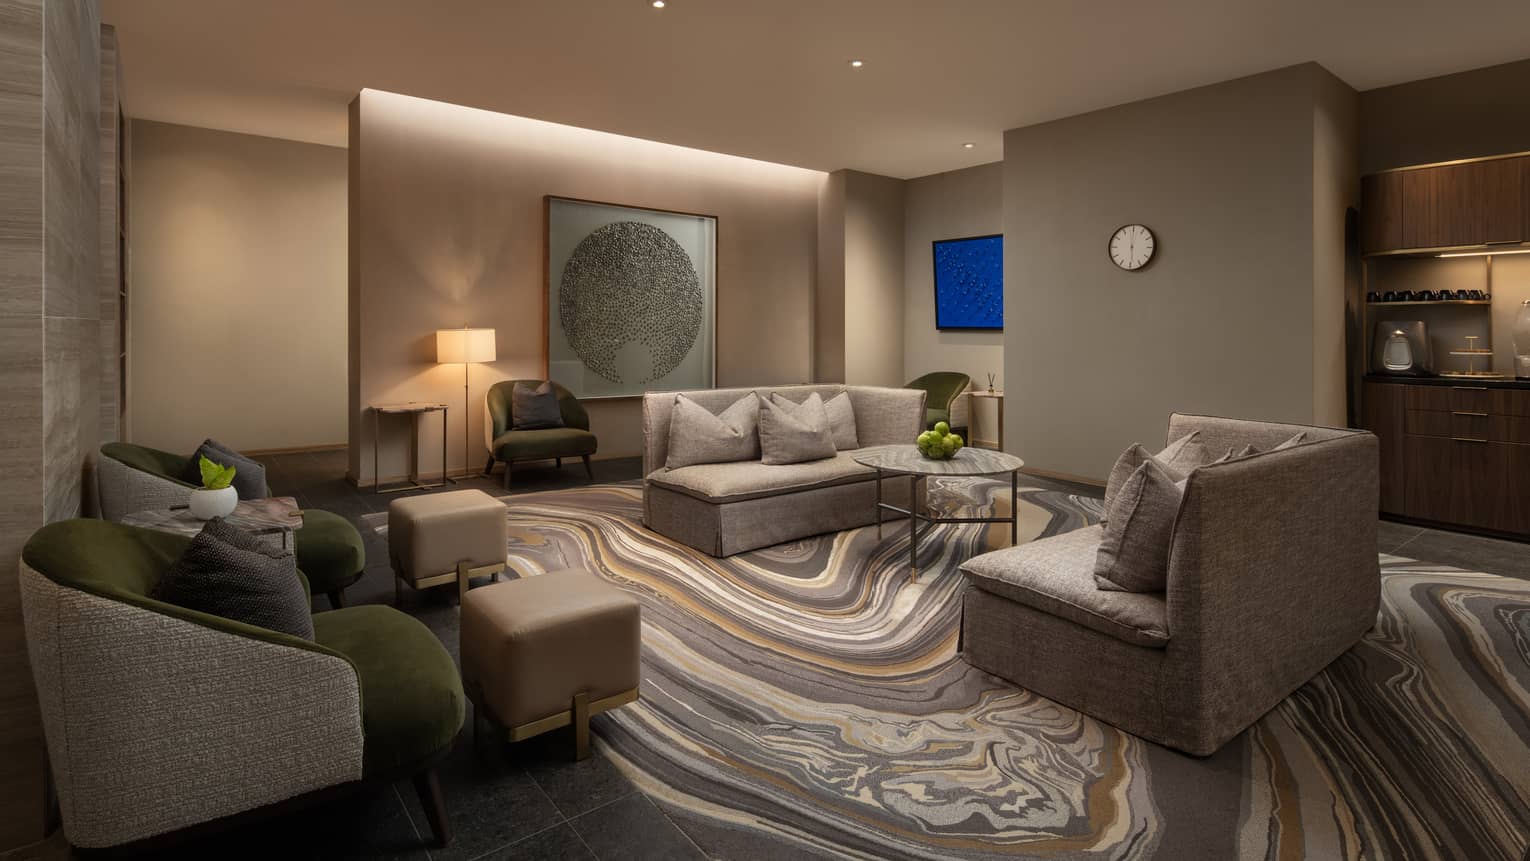 Relaxation lounge area with grey sofas and armchairs, marble-patterned carpet and intimate lighting